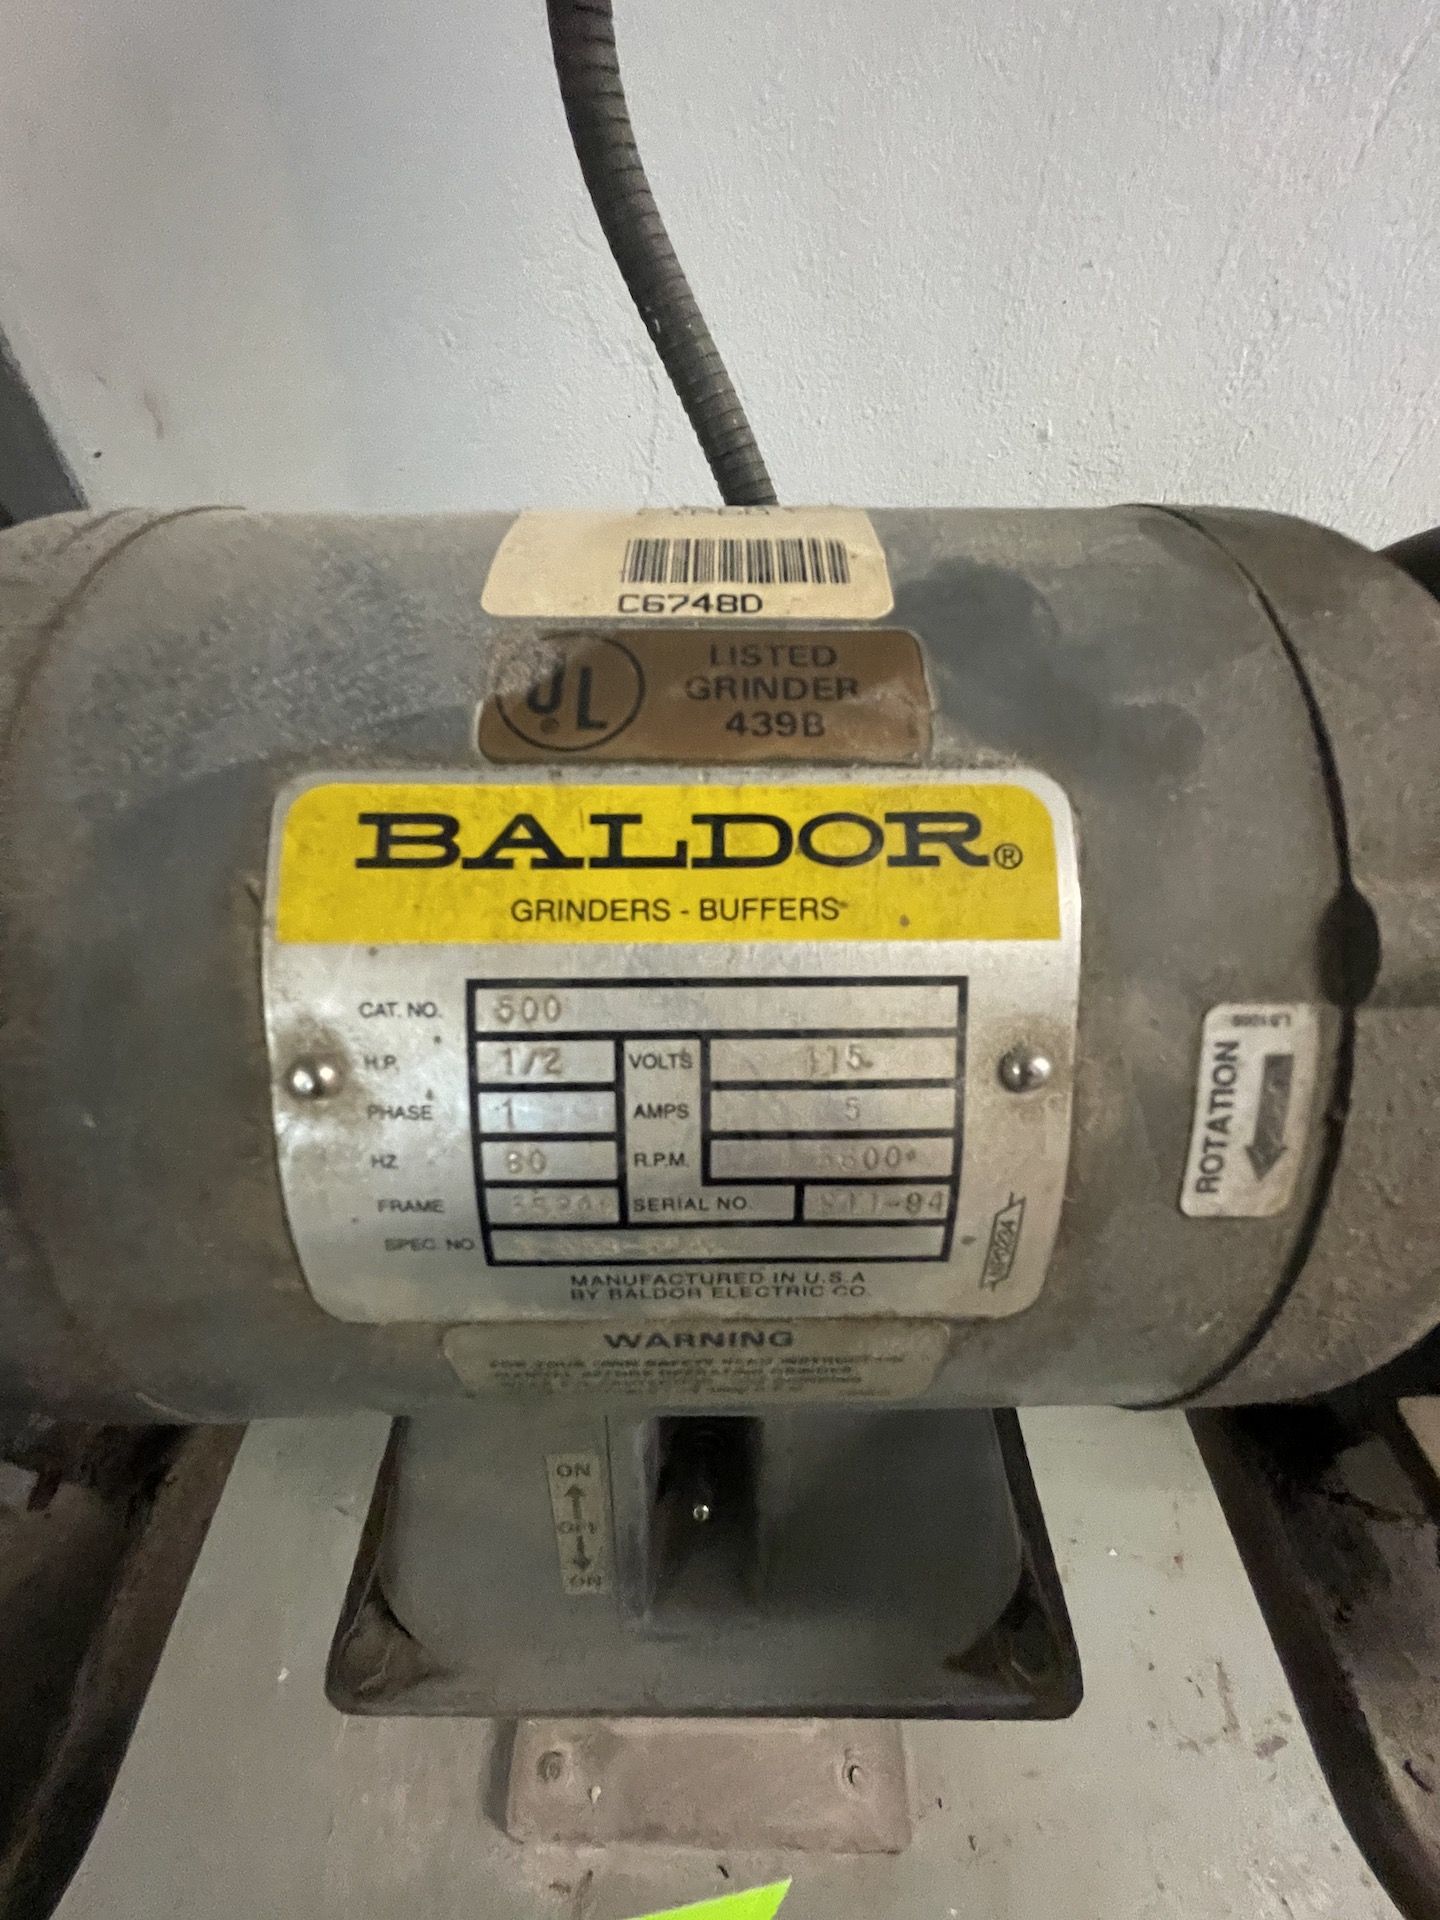 (1) BALDOR DOUBLE-END GRINDER, MODEL 439B, S/N P11-94, 1/2 HP, 3600 RPM (Non-Negotiable Rigging, - Image 2 of 4